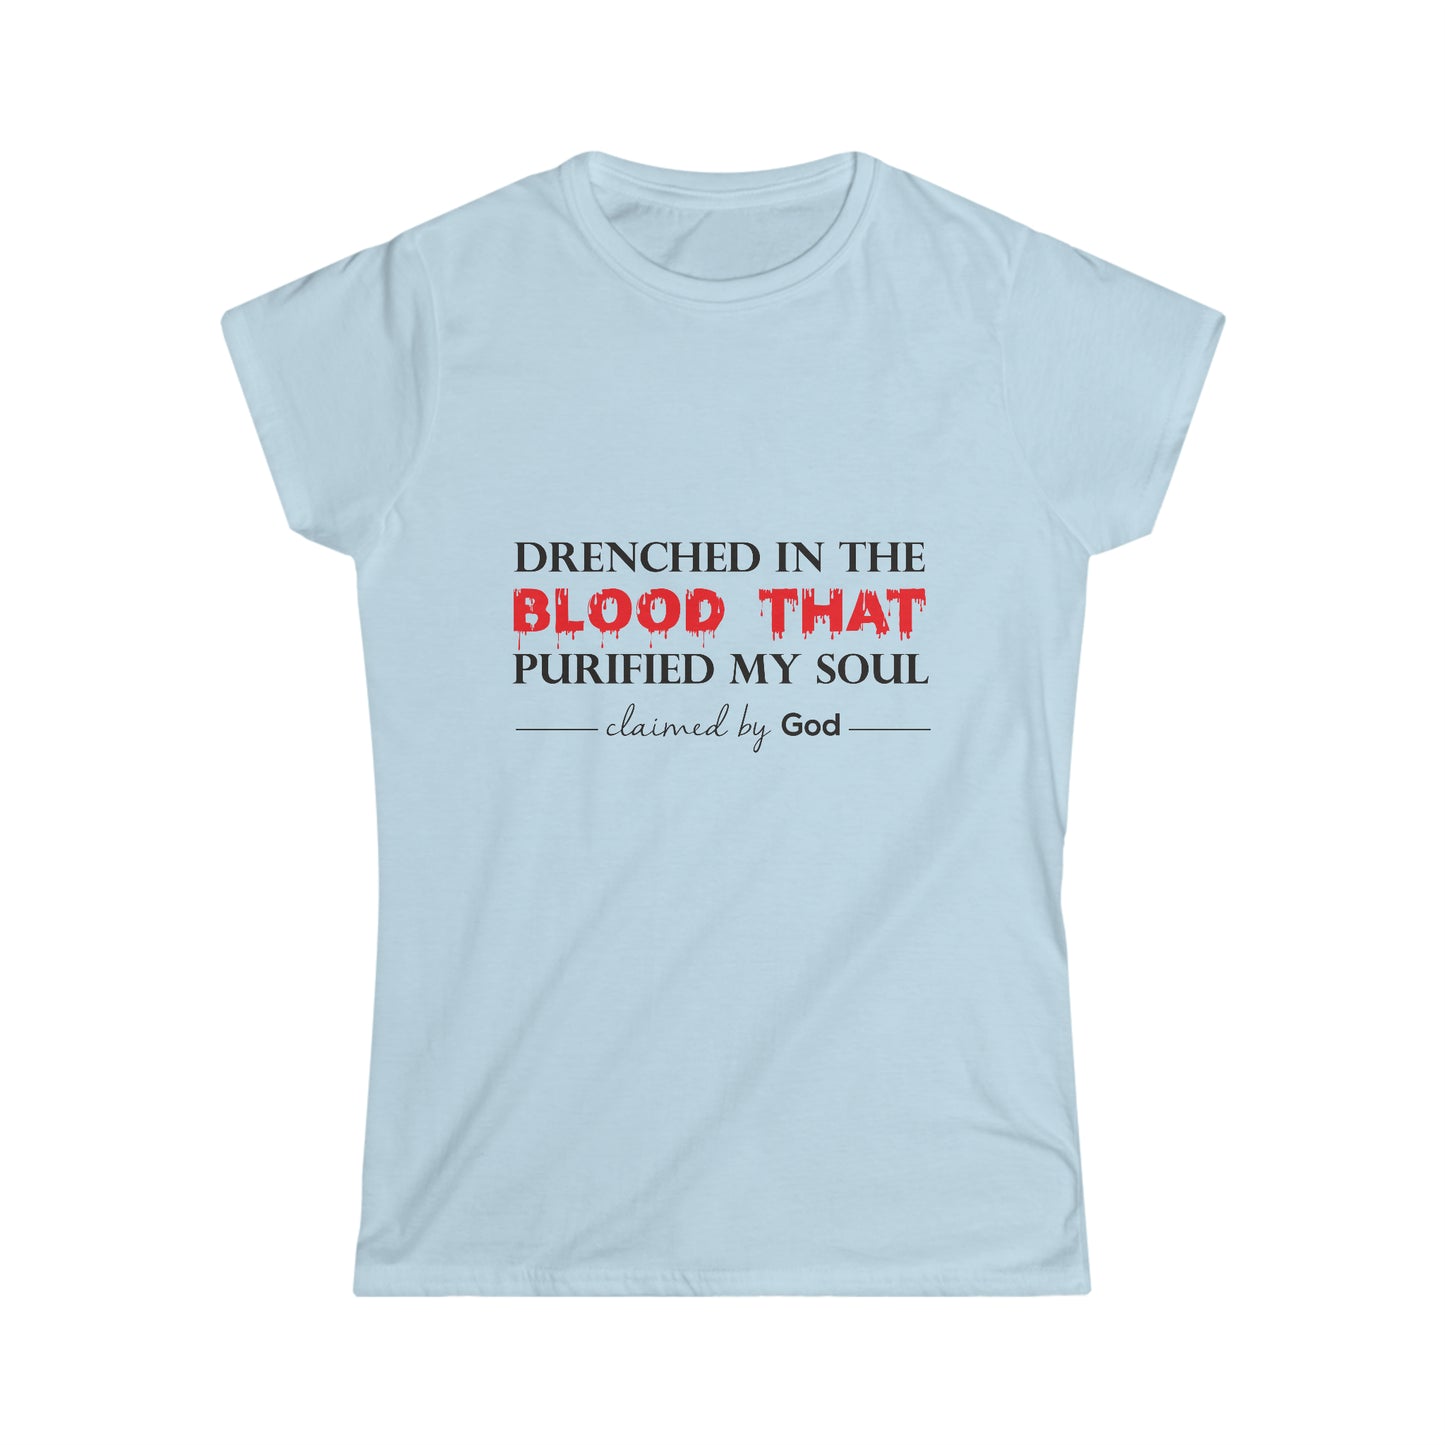 Drenched in the blood that purified my soul Women's T-shirt